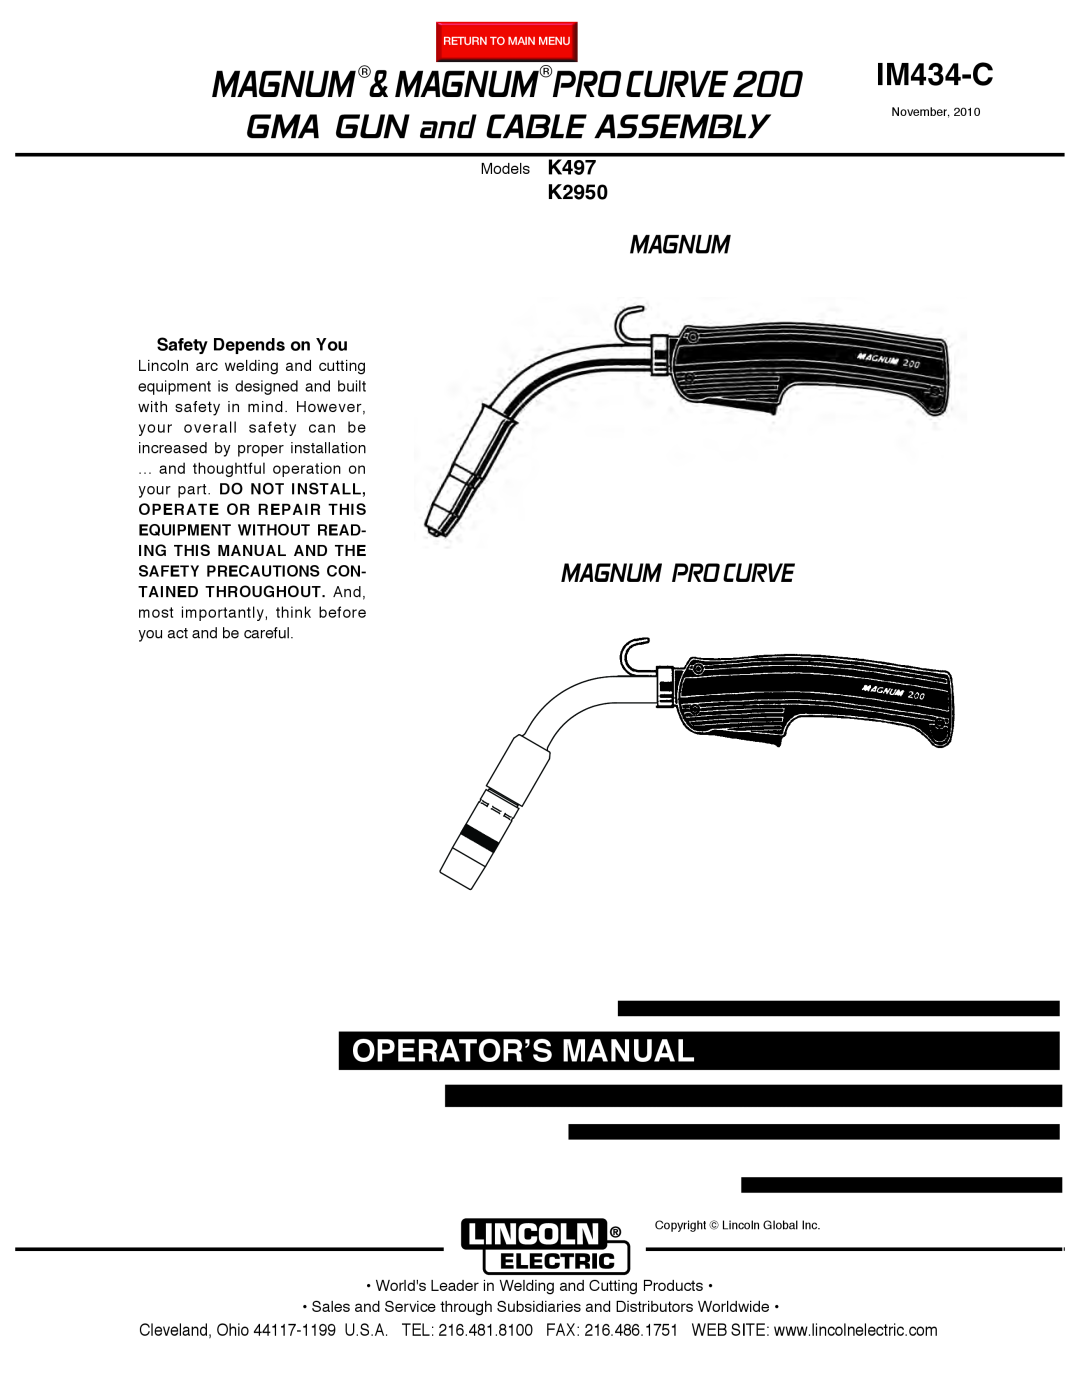 Lincoln Electric K2950, K497 manual IM434-C, Safety Depends on You, Magnum& Magnumpro Curve, GMA GUN and CABLE ASSEMBLY 